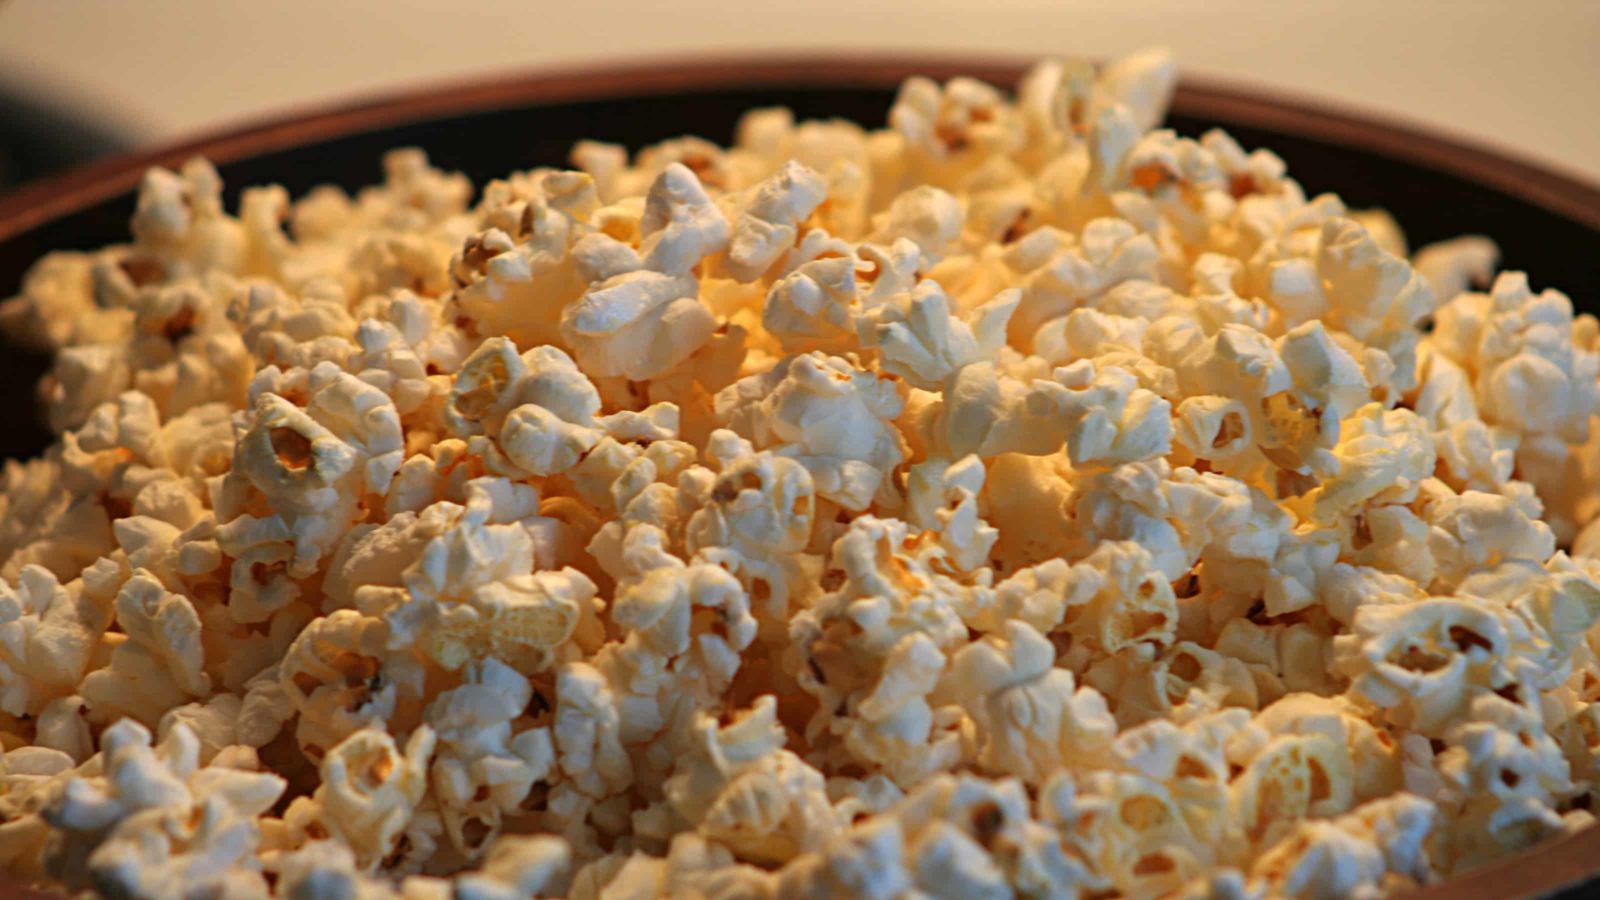 Popcorn glimmers in a warm light. Creative Commons courtesy photo.